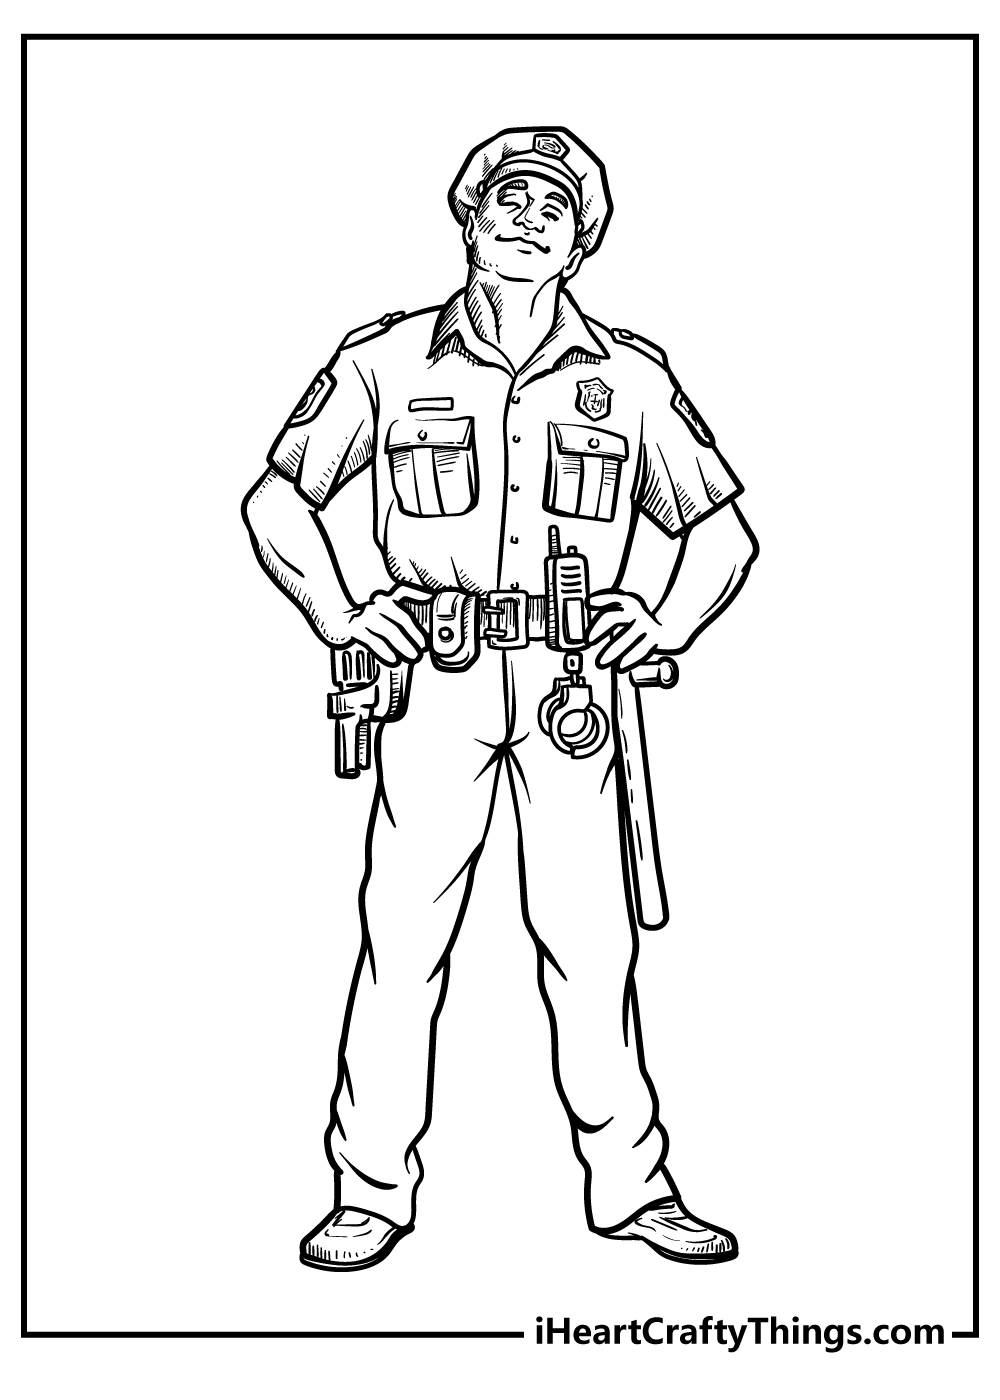 Police Coloring Pages for preschoolers free printable